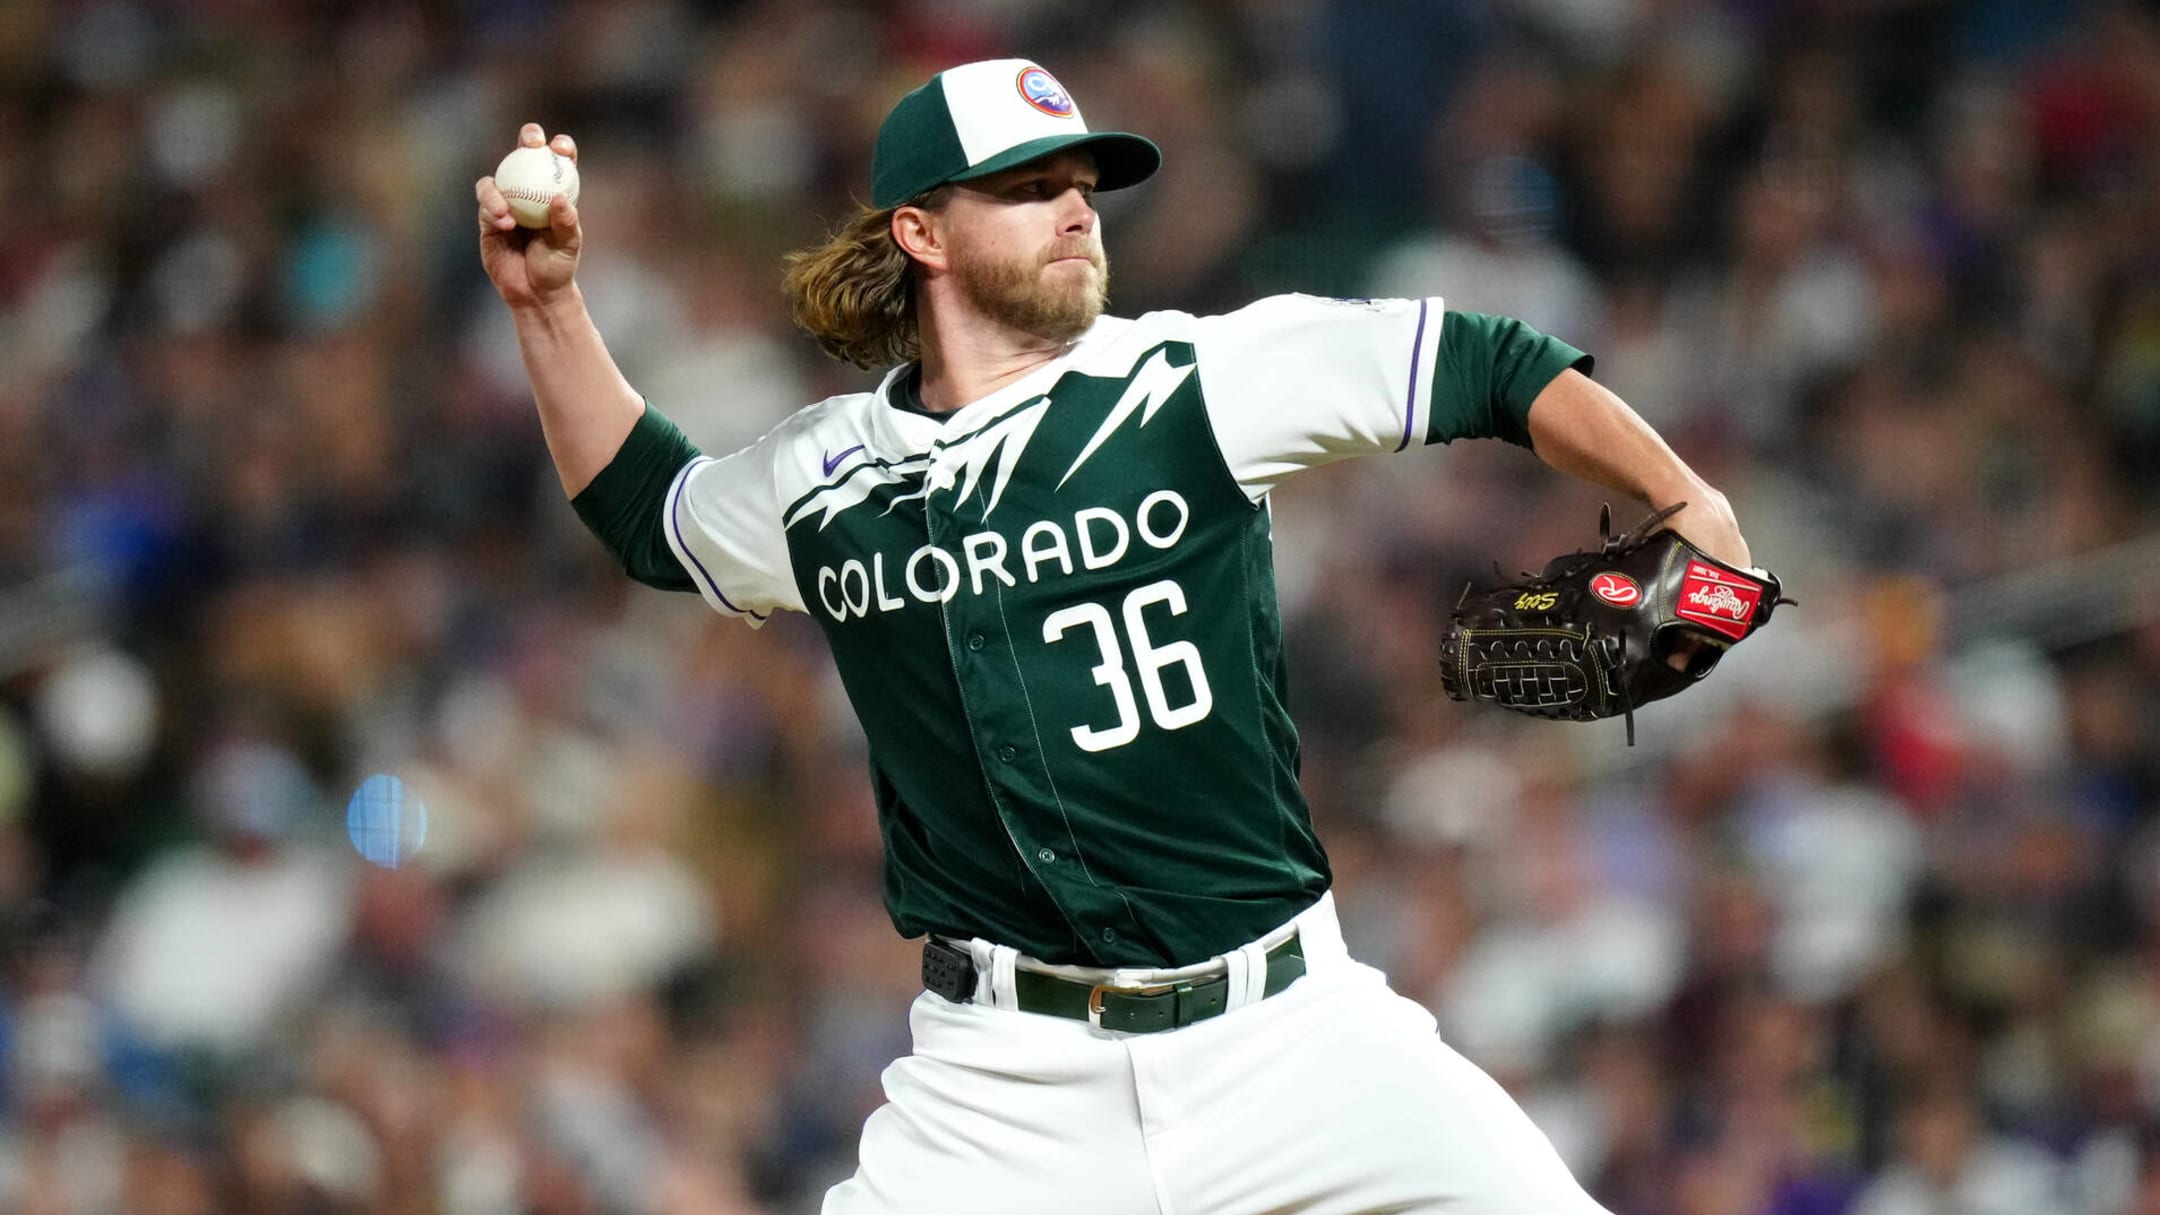 Pierce Johnson signs with Rockies for one-year, $5 million